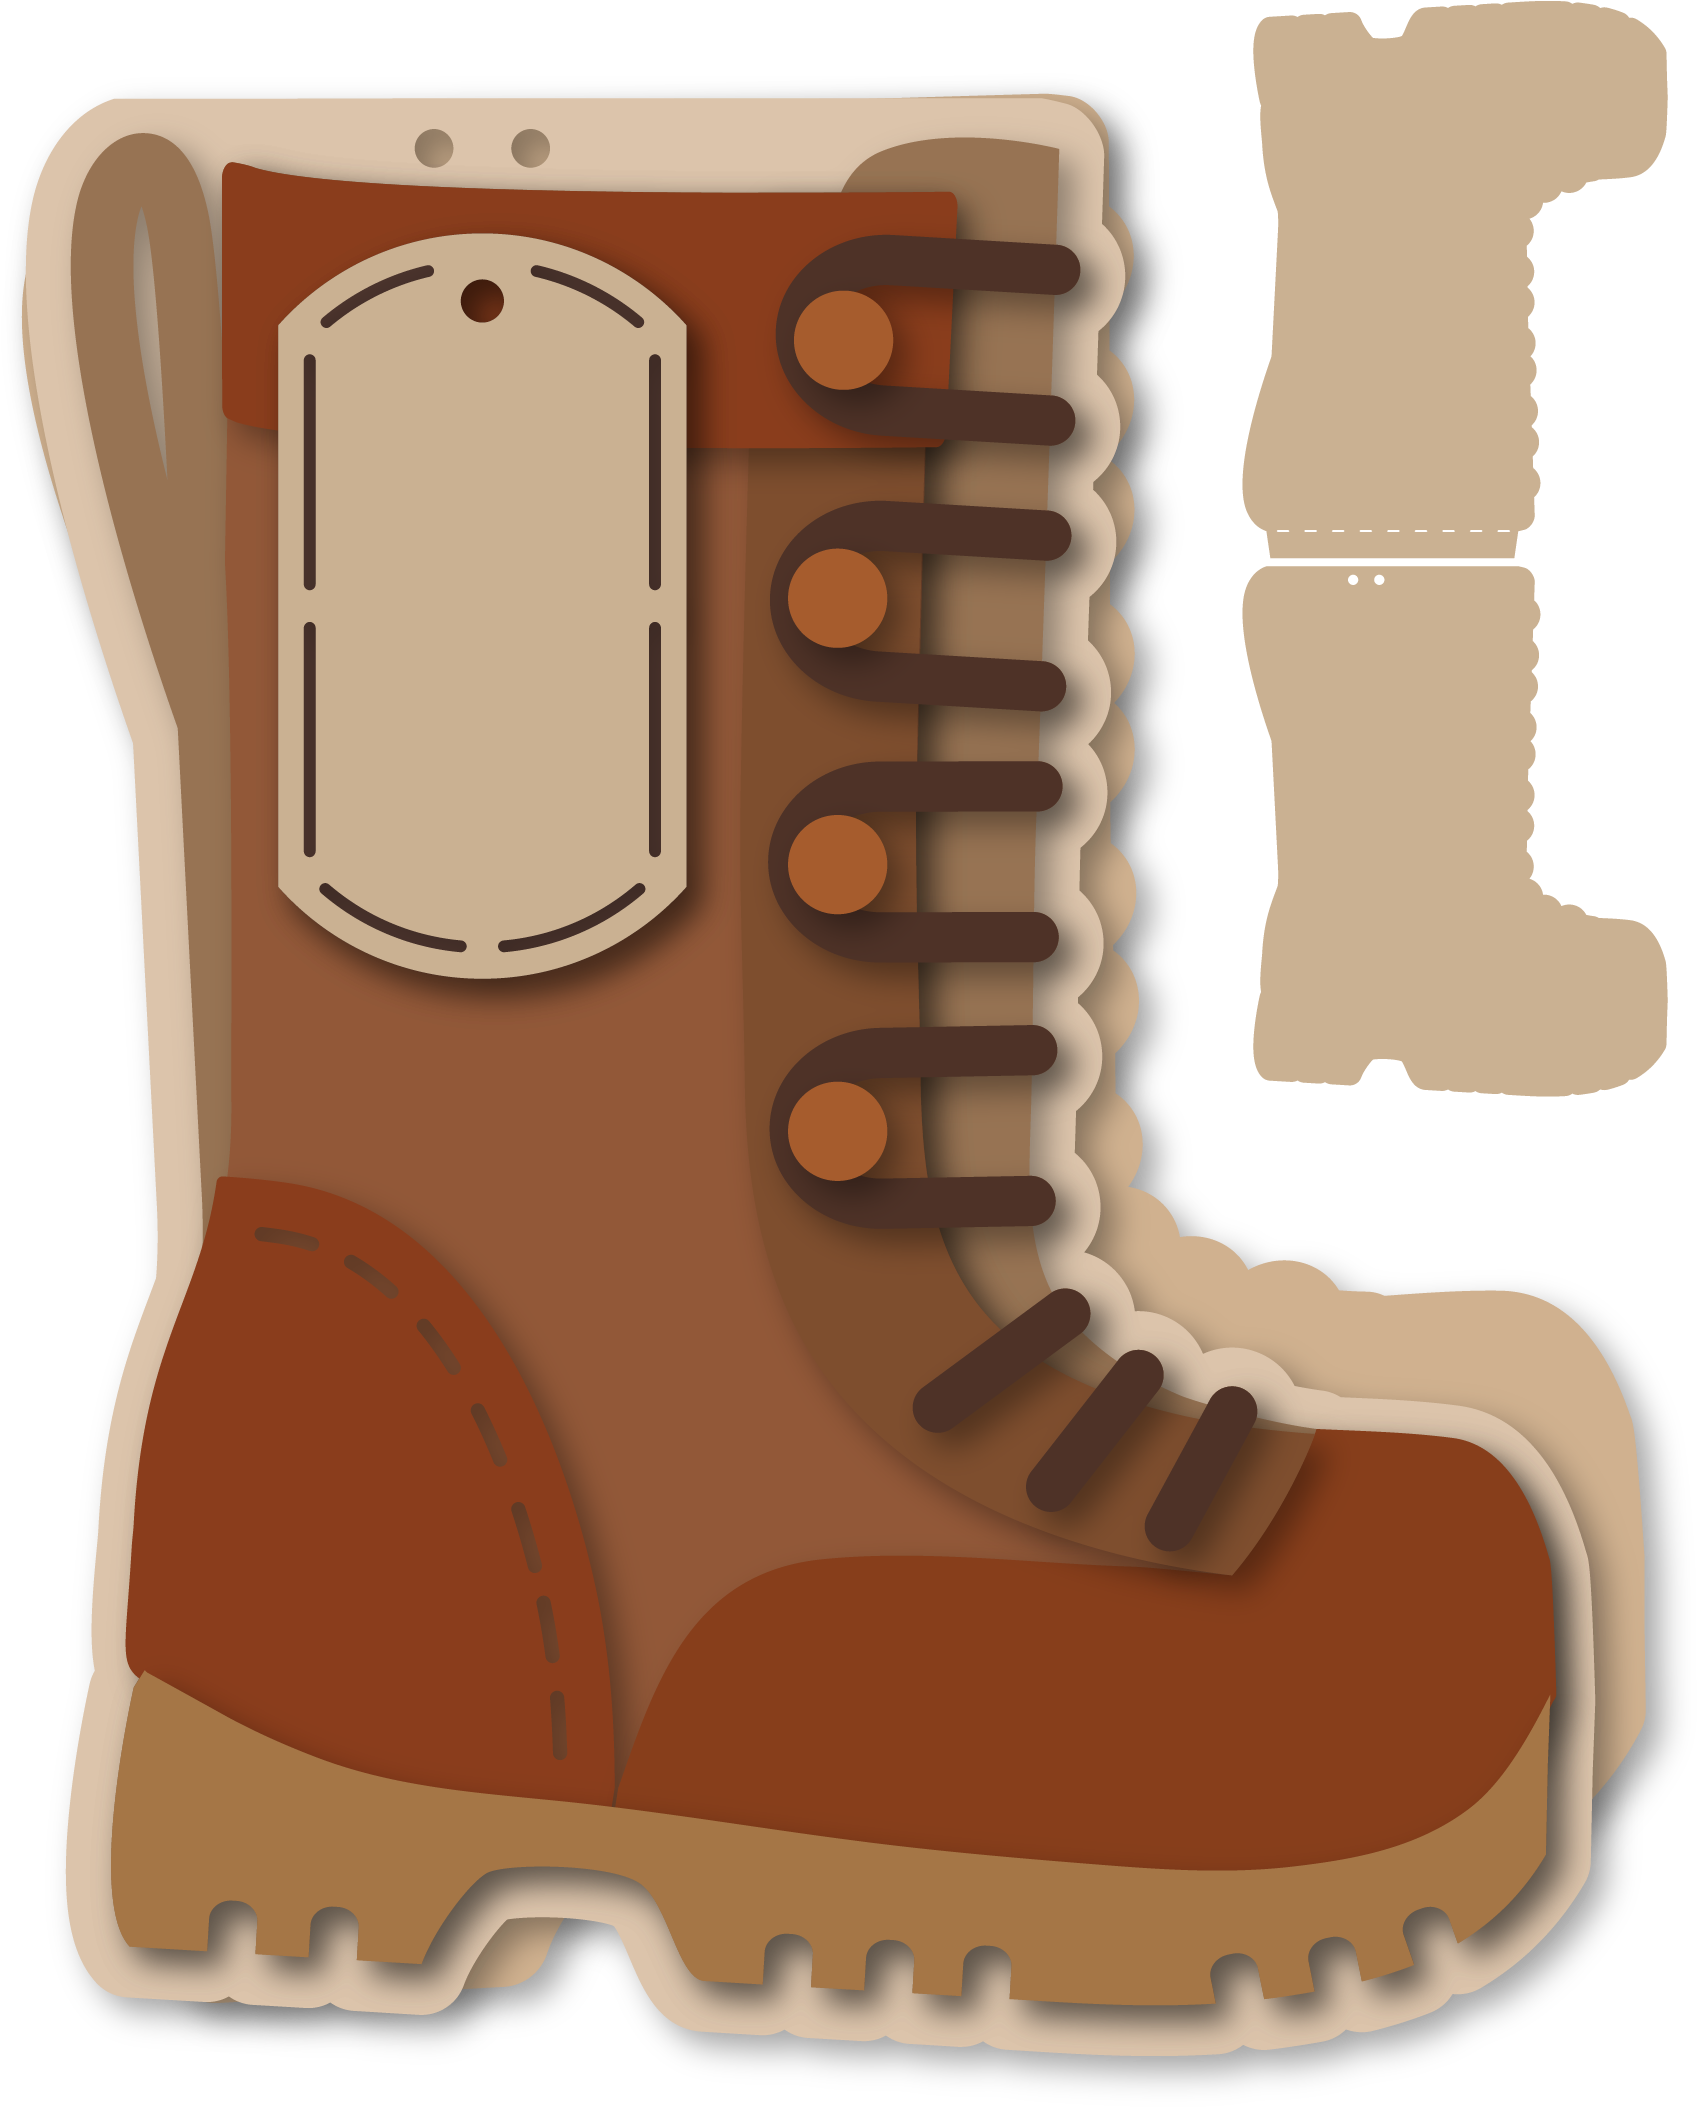 1714 X 2115 1 - Steel-toe Boot (1714x2115), Png Download